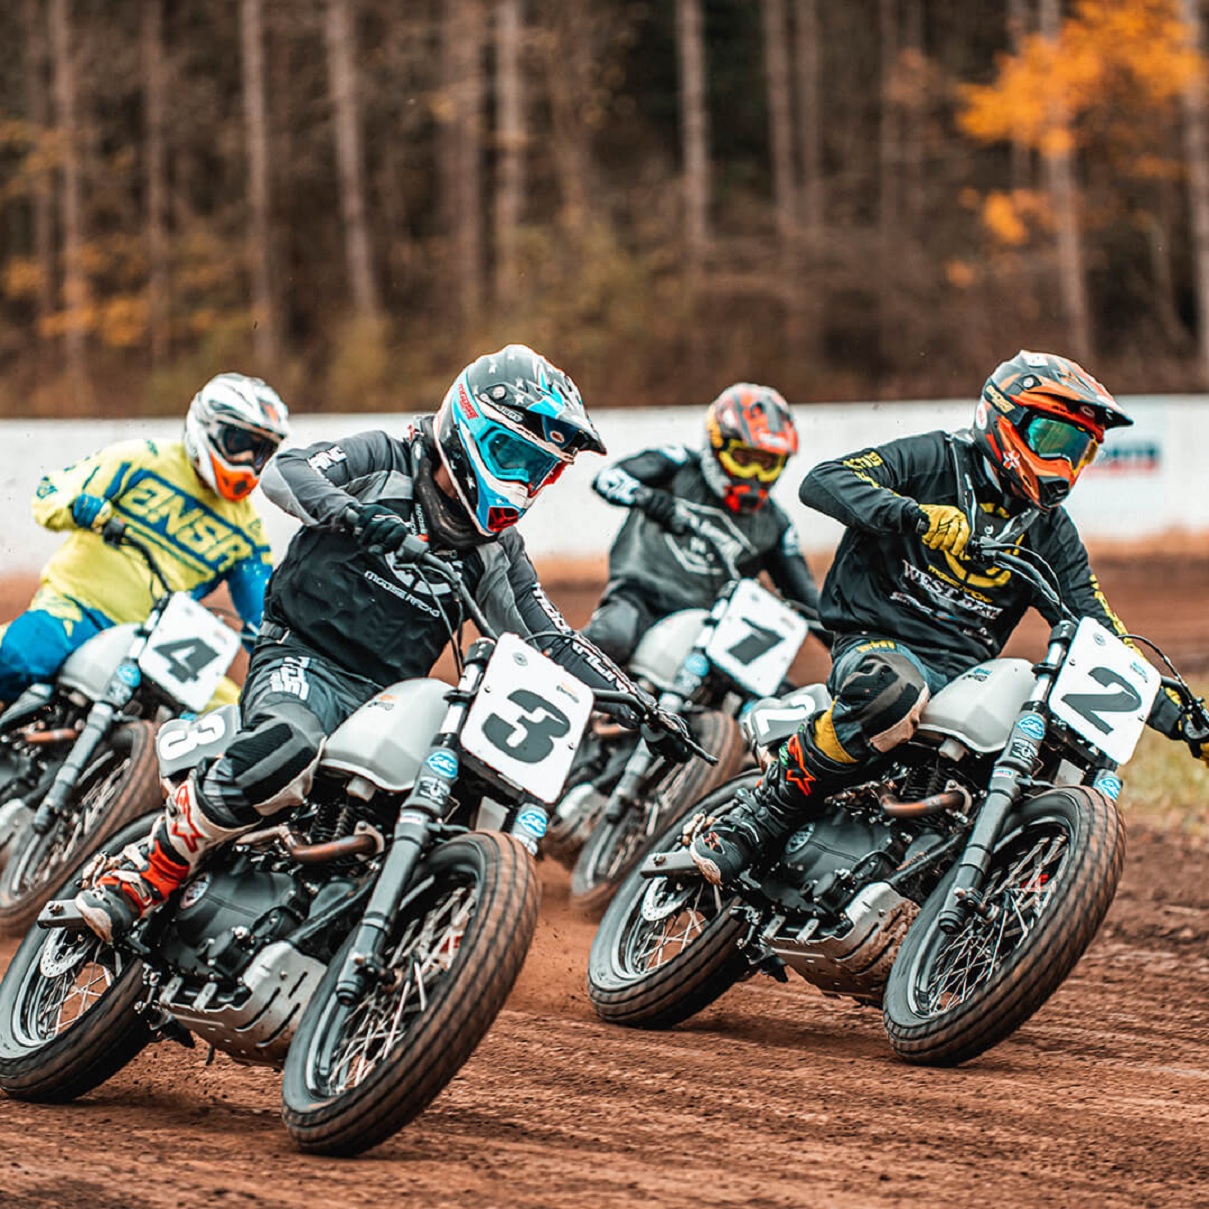 Riders in the Royal Enfield flat track racing Slide School on Himalayan FT411s